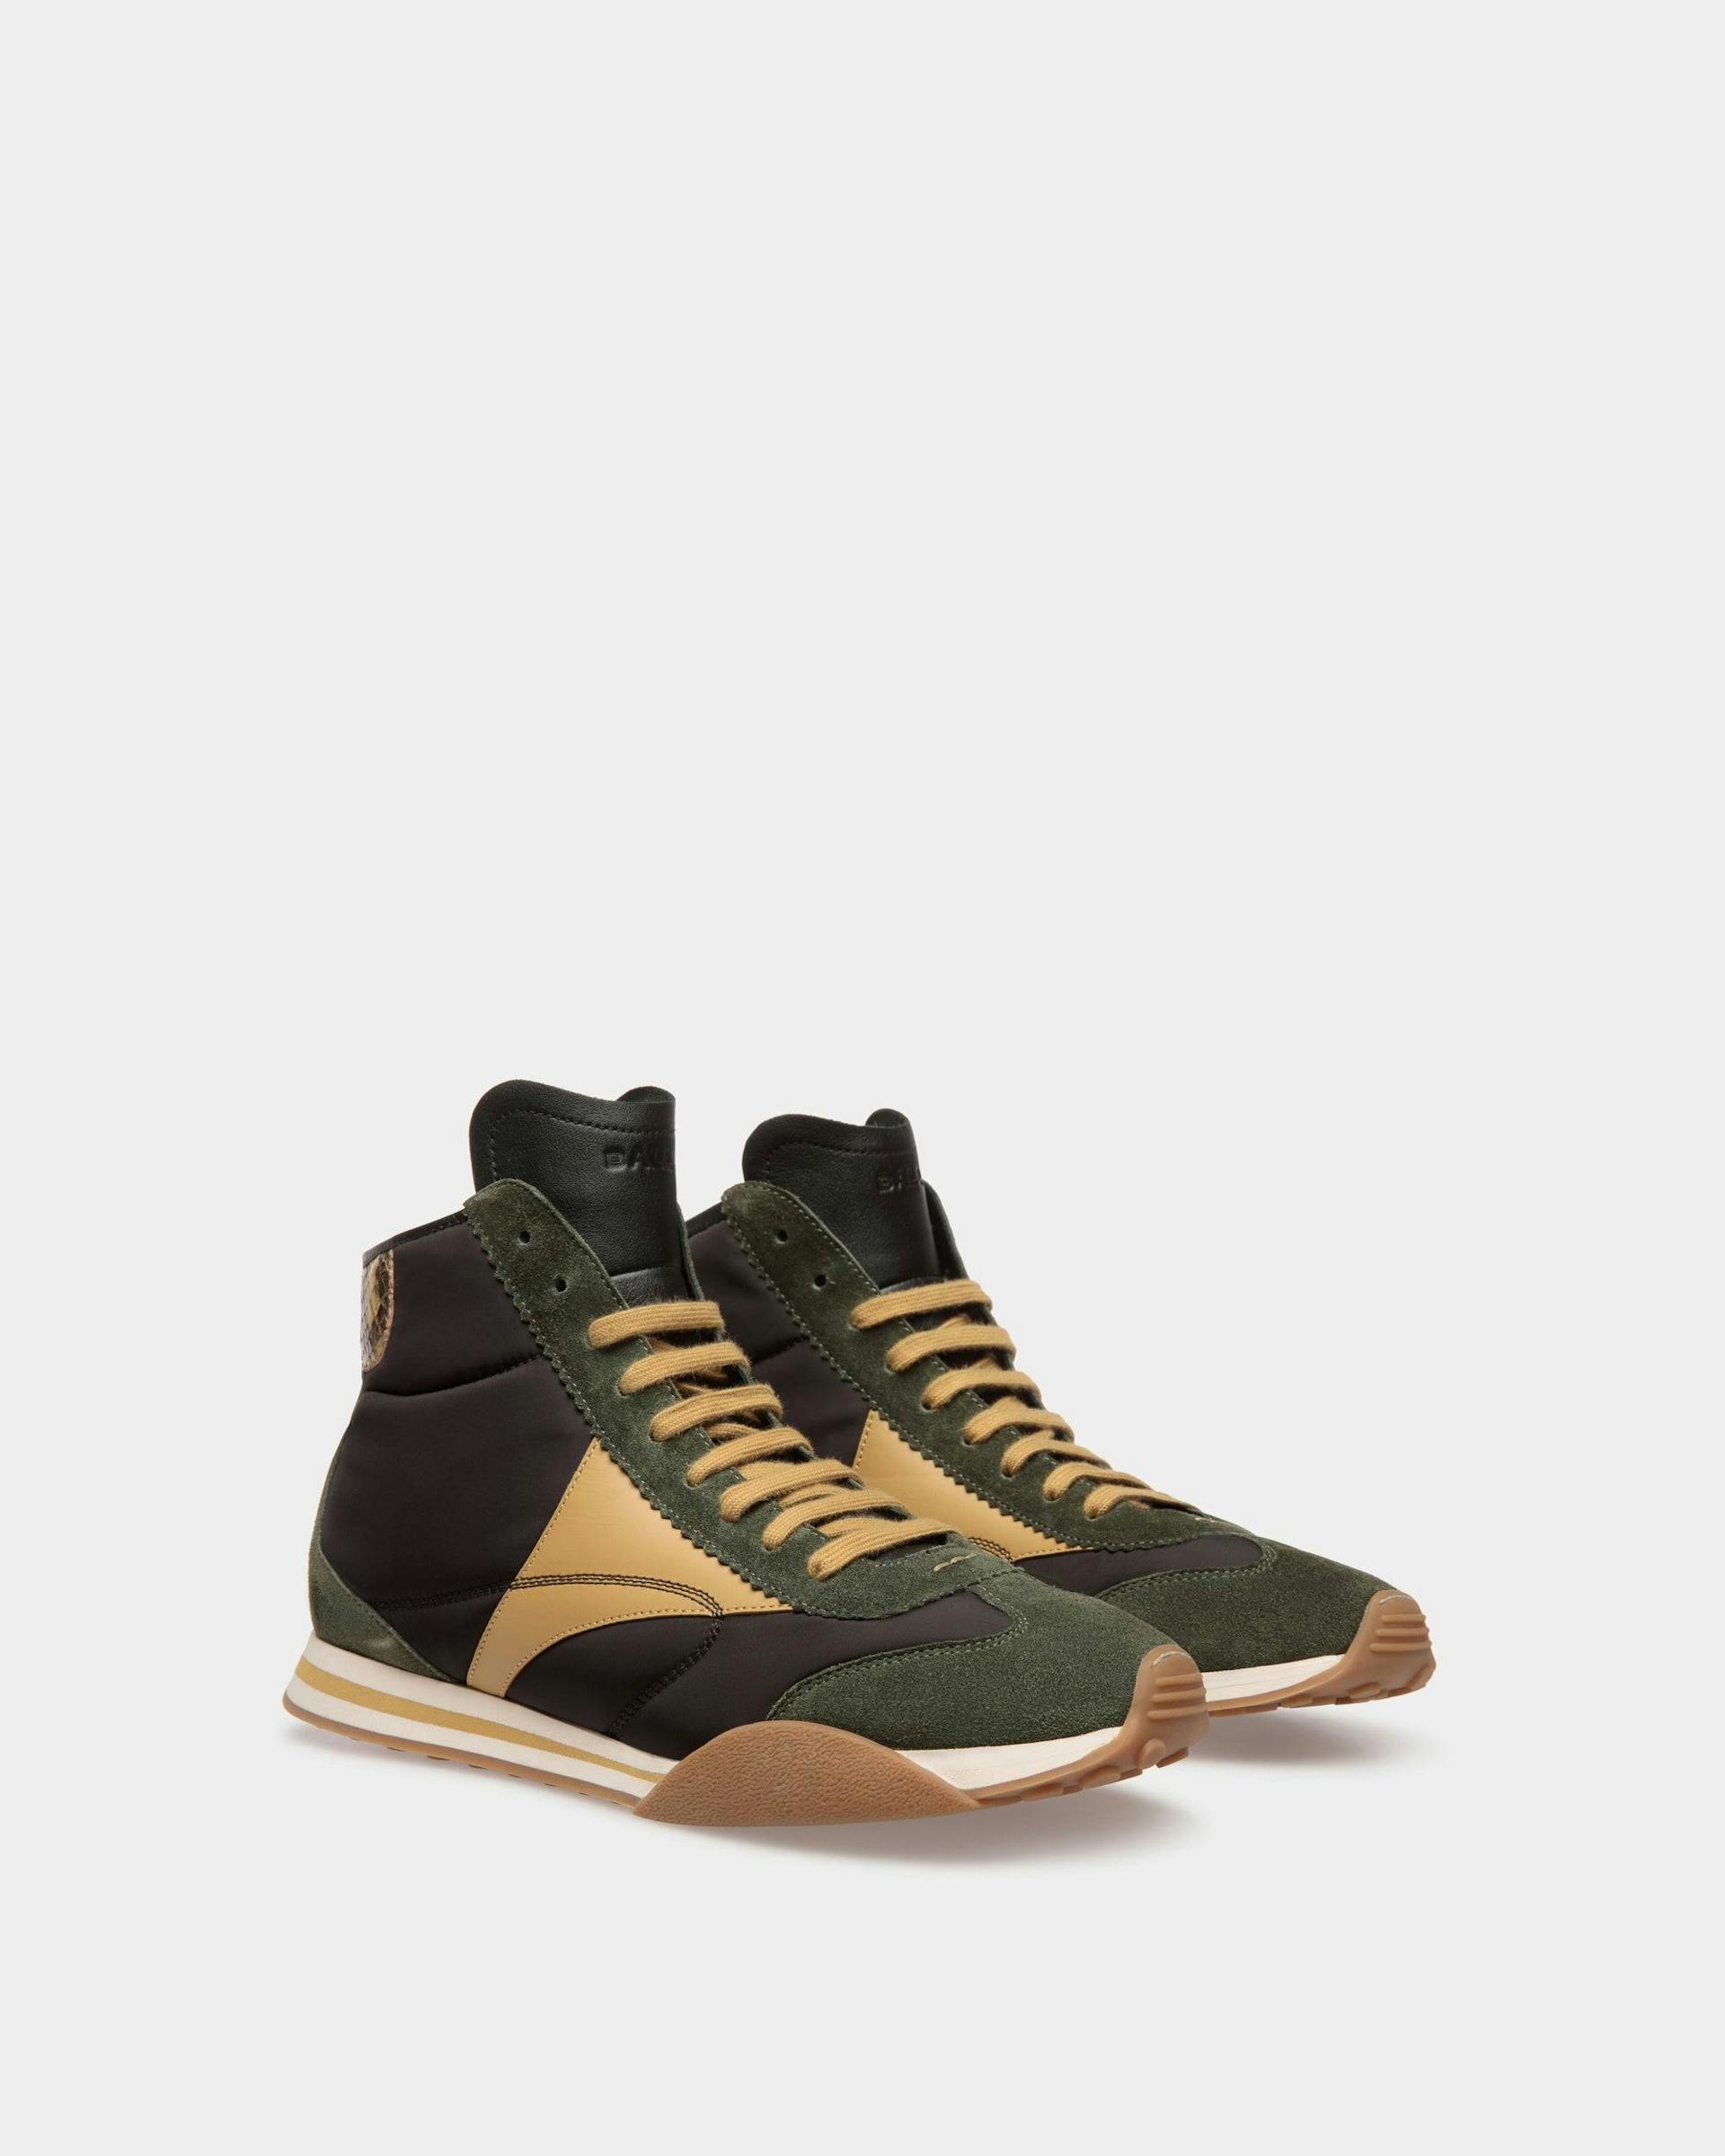 Sussex Sneakers In Green And Black Leather And Fabric - Men's - Bally - 02